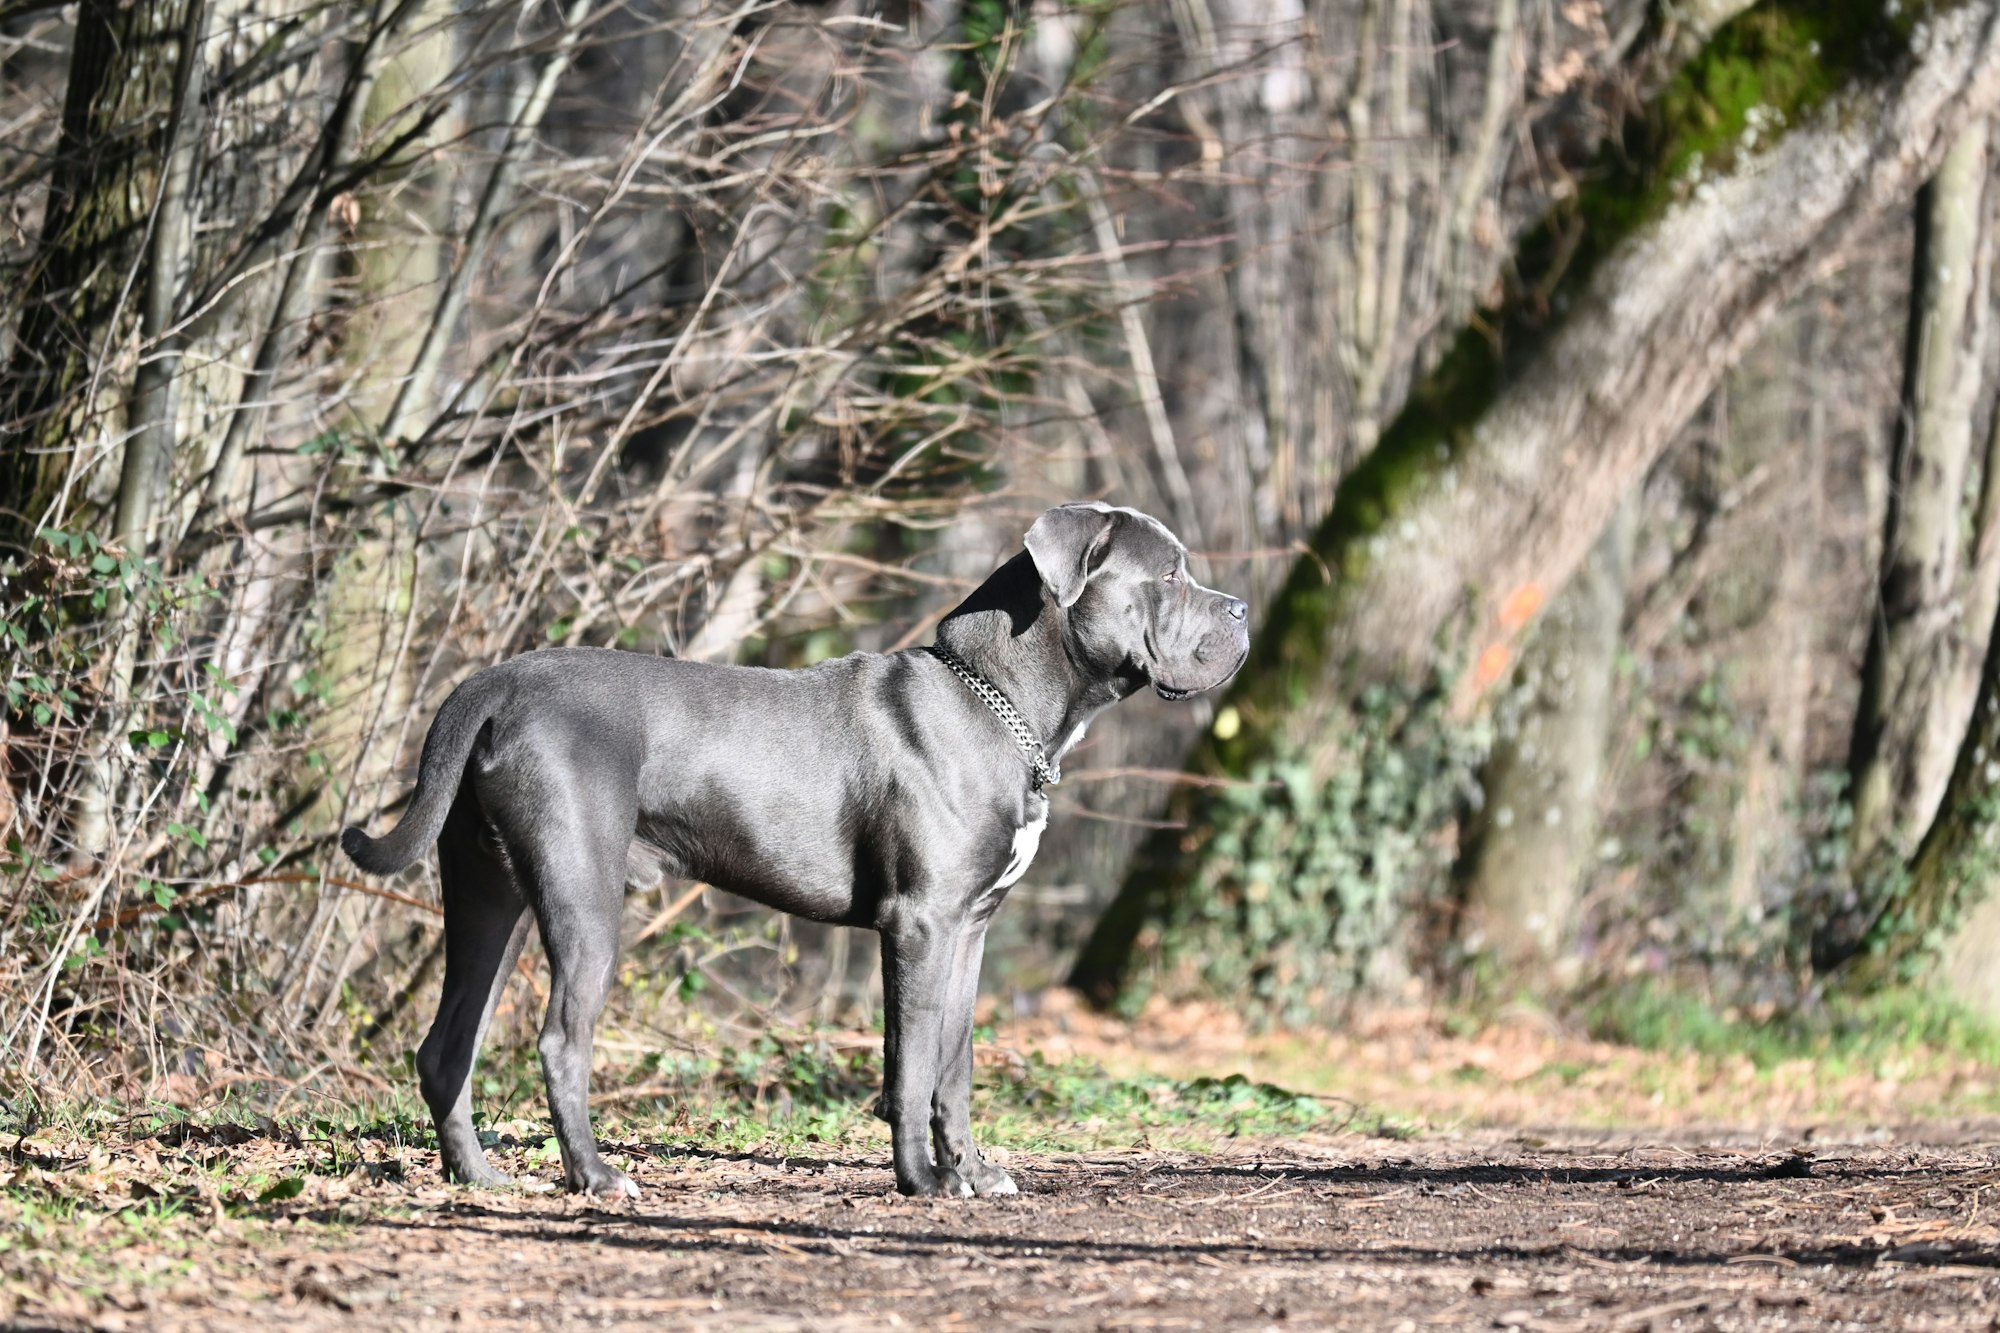 All About Blue Cane Corsos: A Breed Profile for 2023